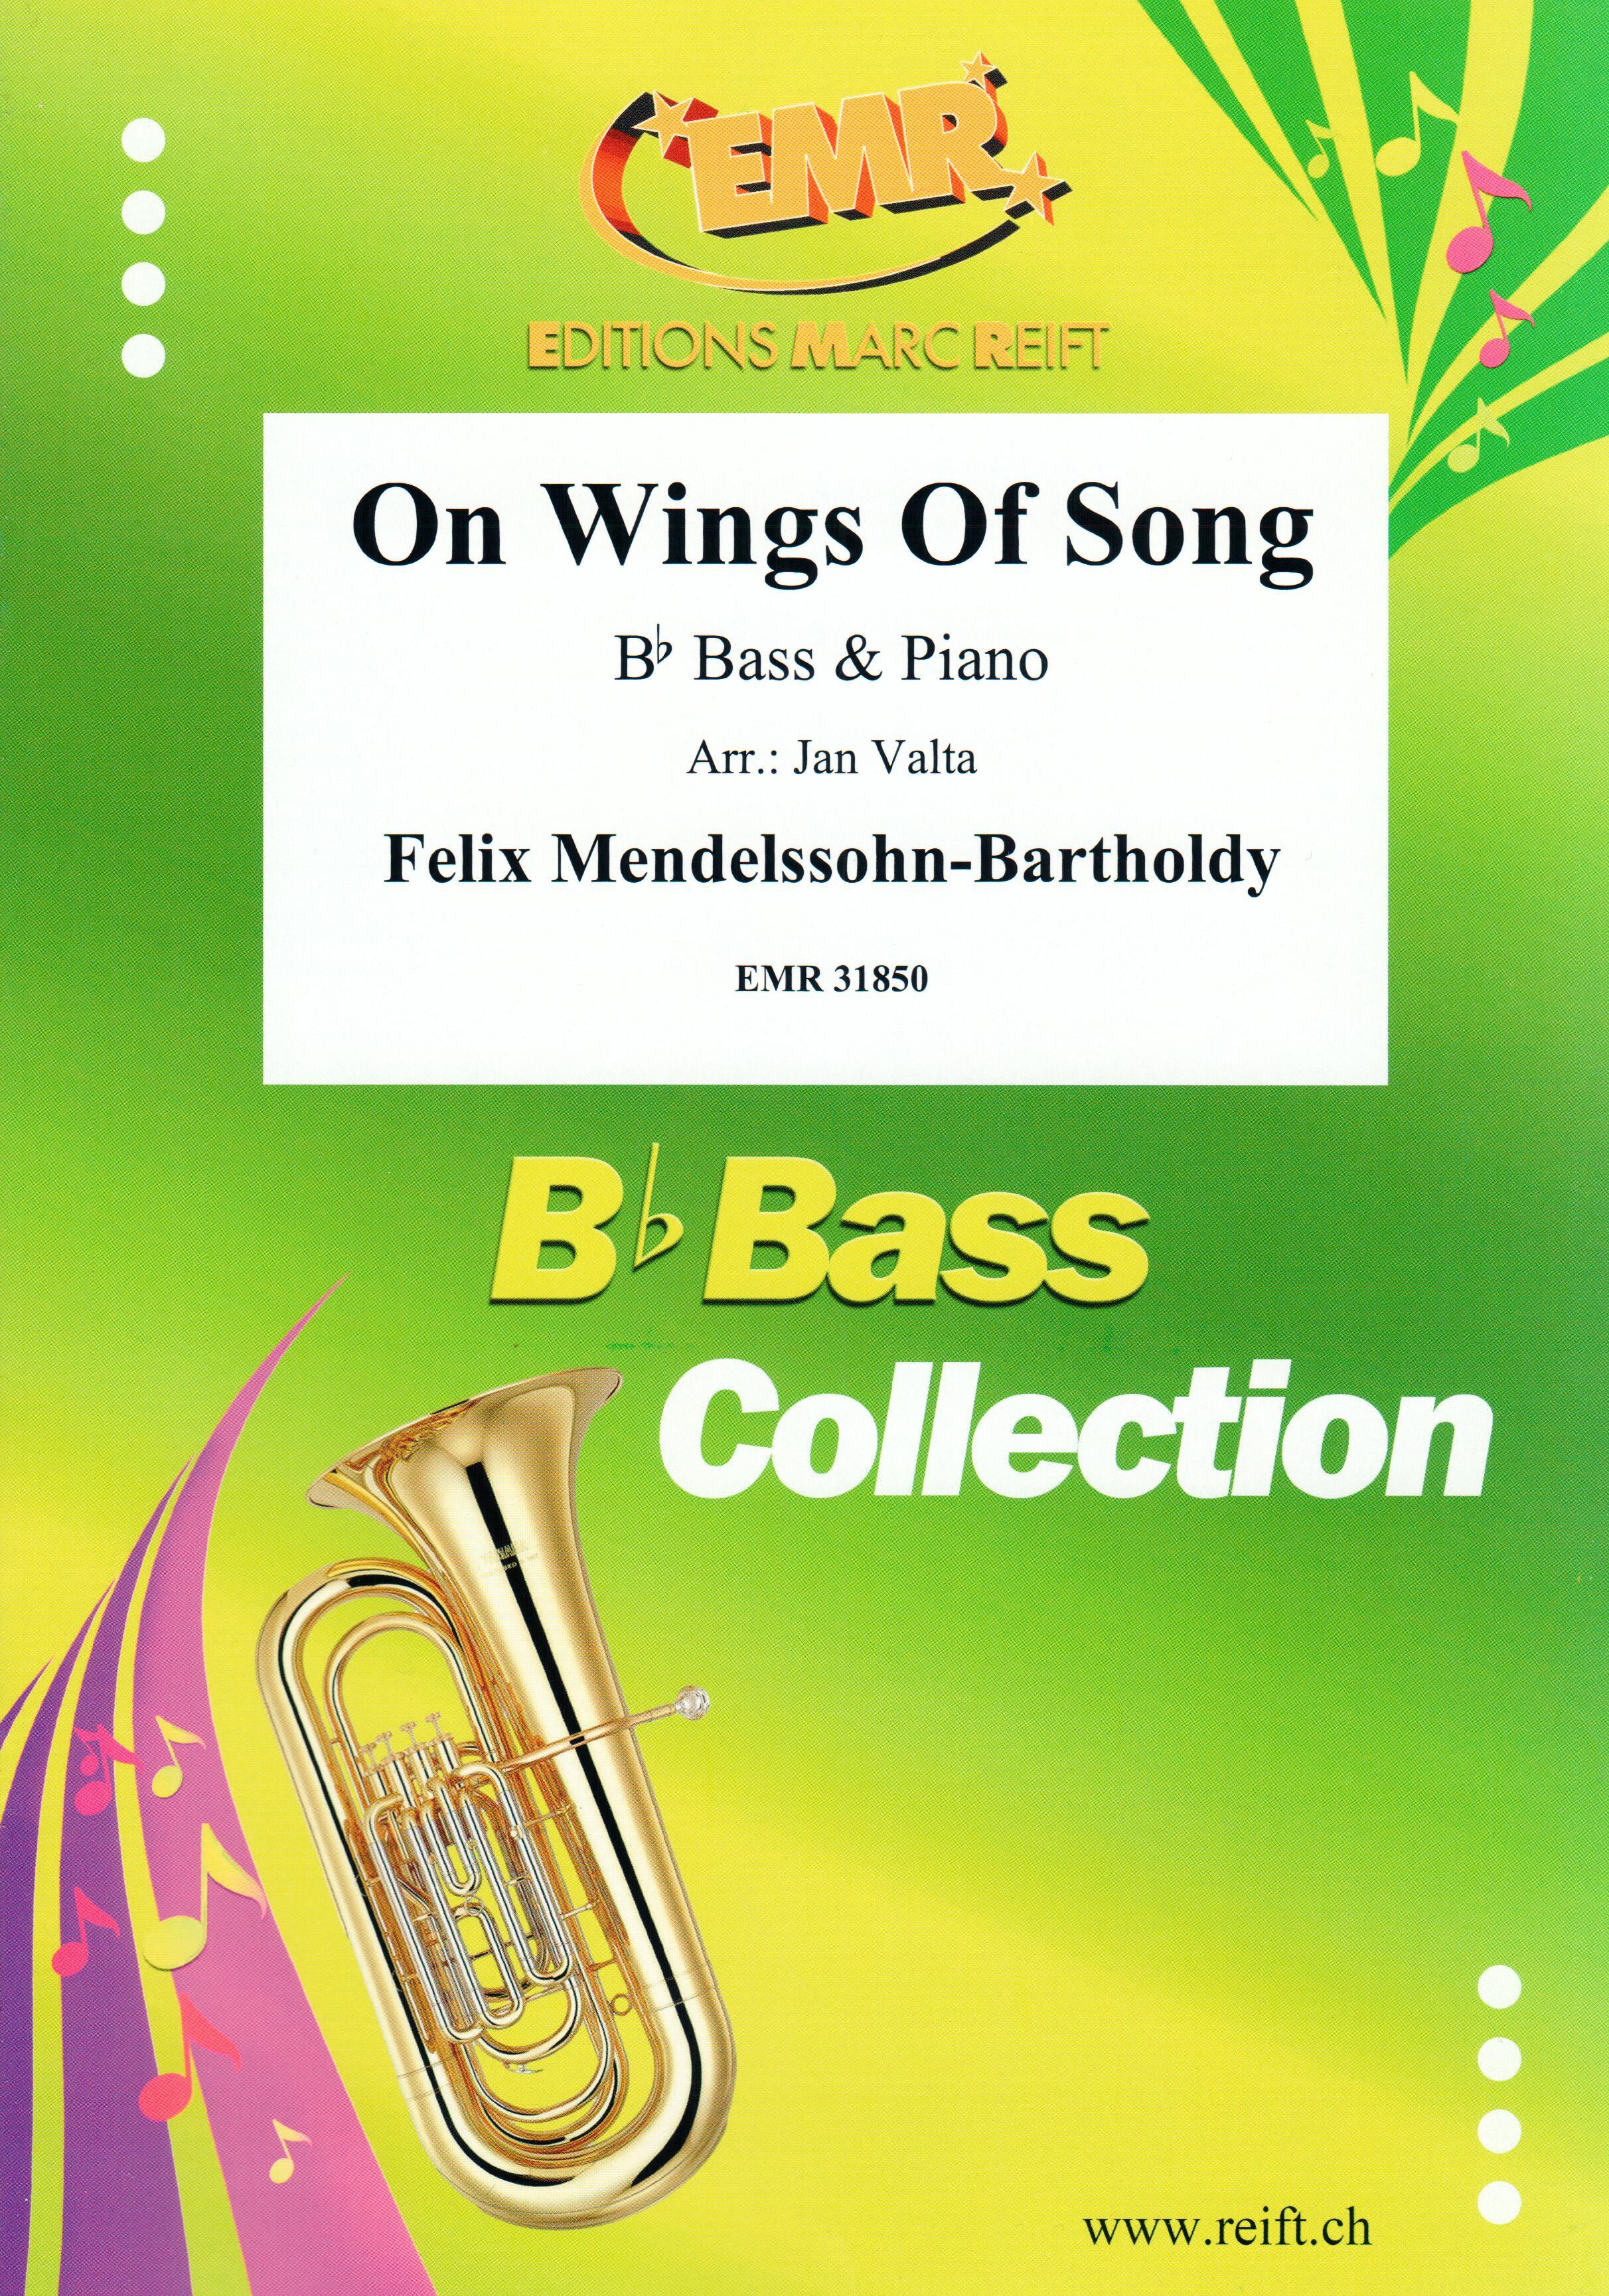 ON WINGS OF SONG, SOLOS - E♭. Bass